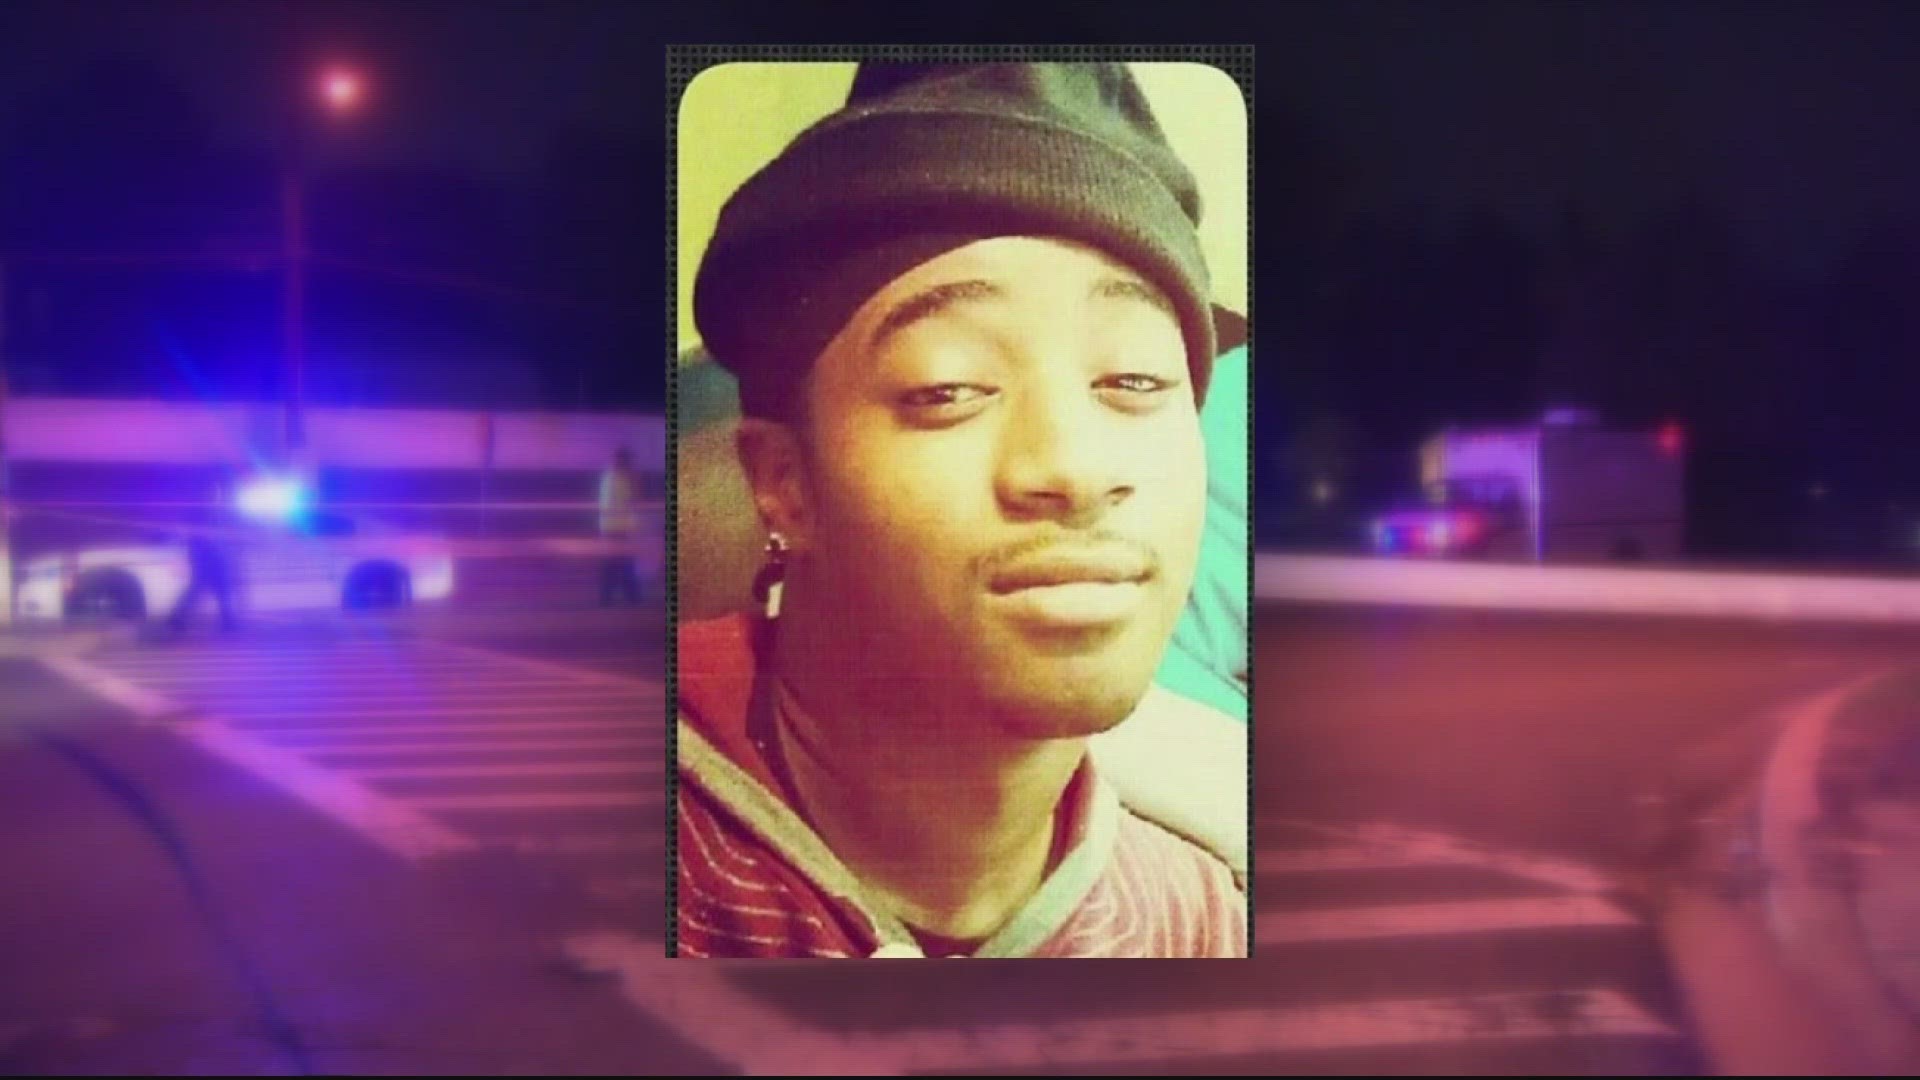 A heartbroken family in Germantown, Maryland is mourning the loss of 28-year-old cyclist David Glenn Jenkins II.